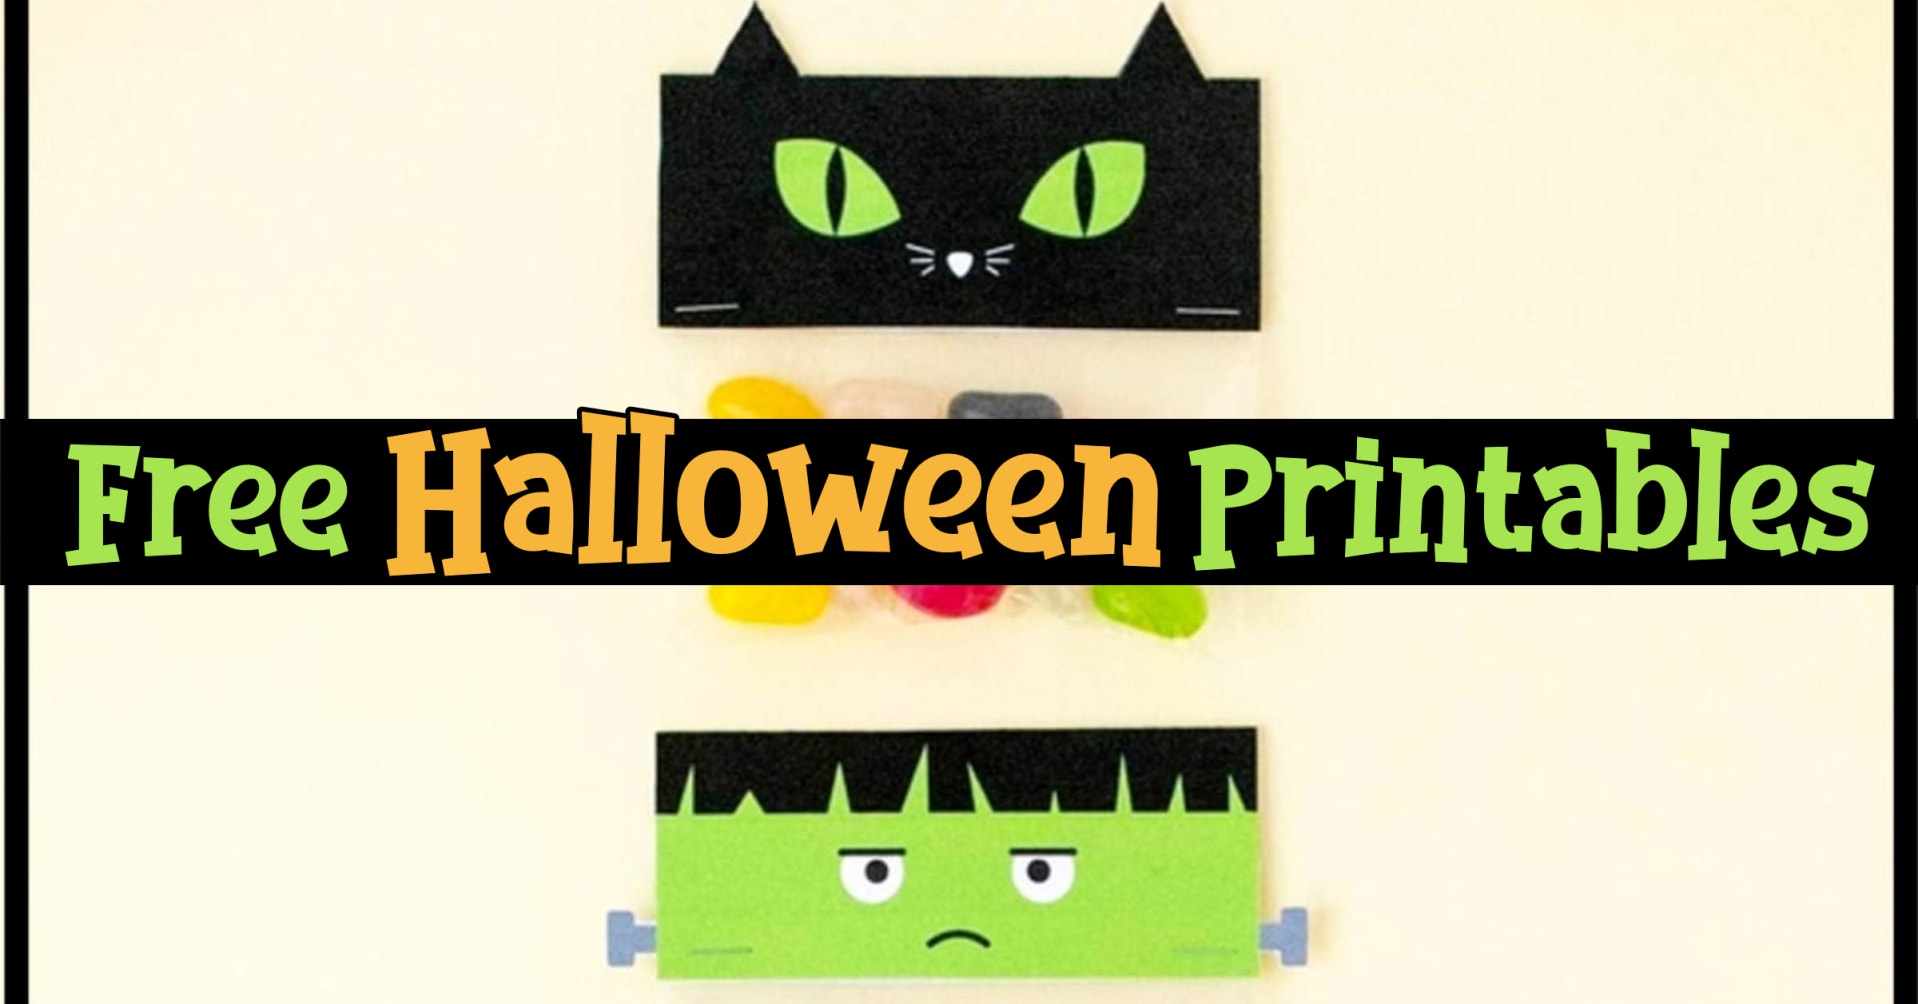 Halloween Printables - happy halloween printables and halloween crafts for kids all free printables - halloween coloring pages and halloween party printables for adults and kids